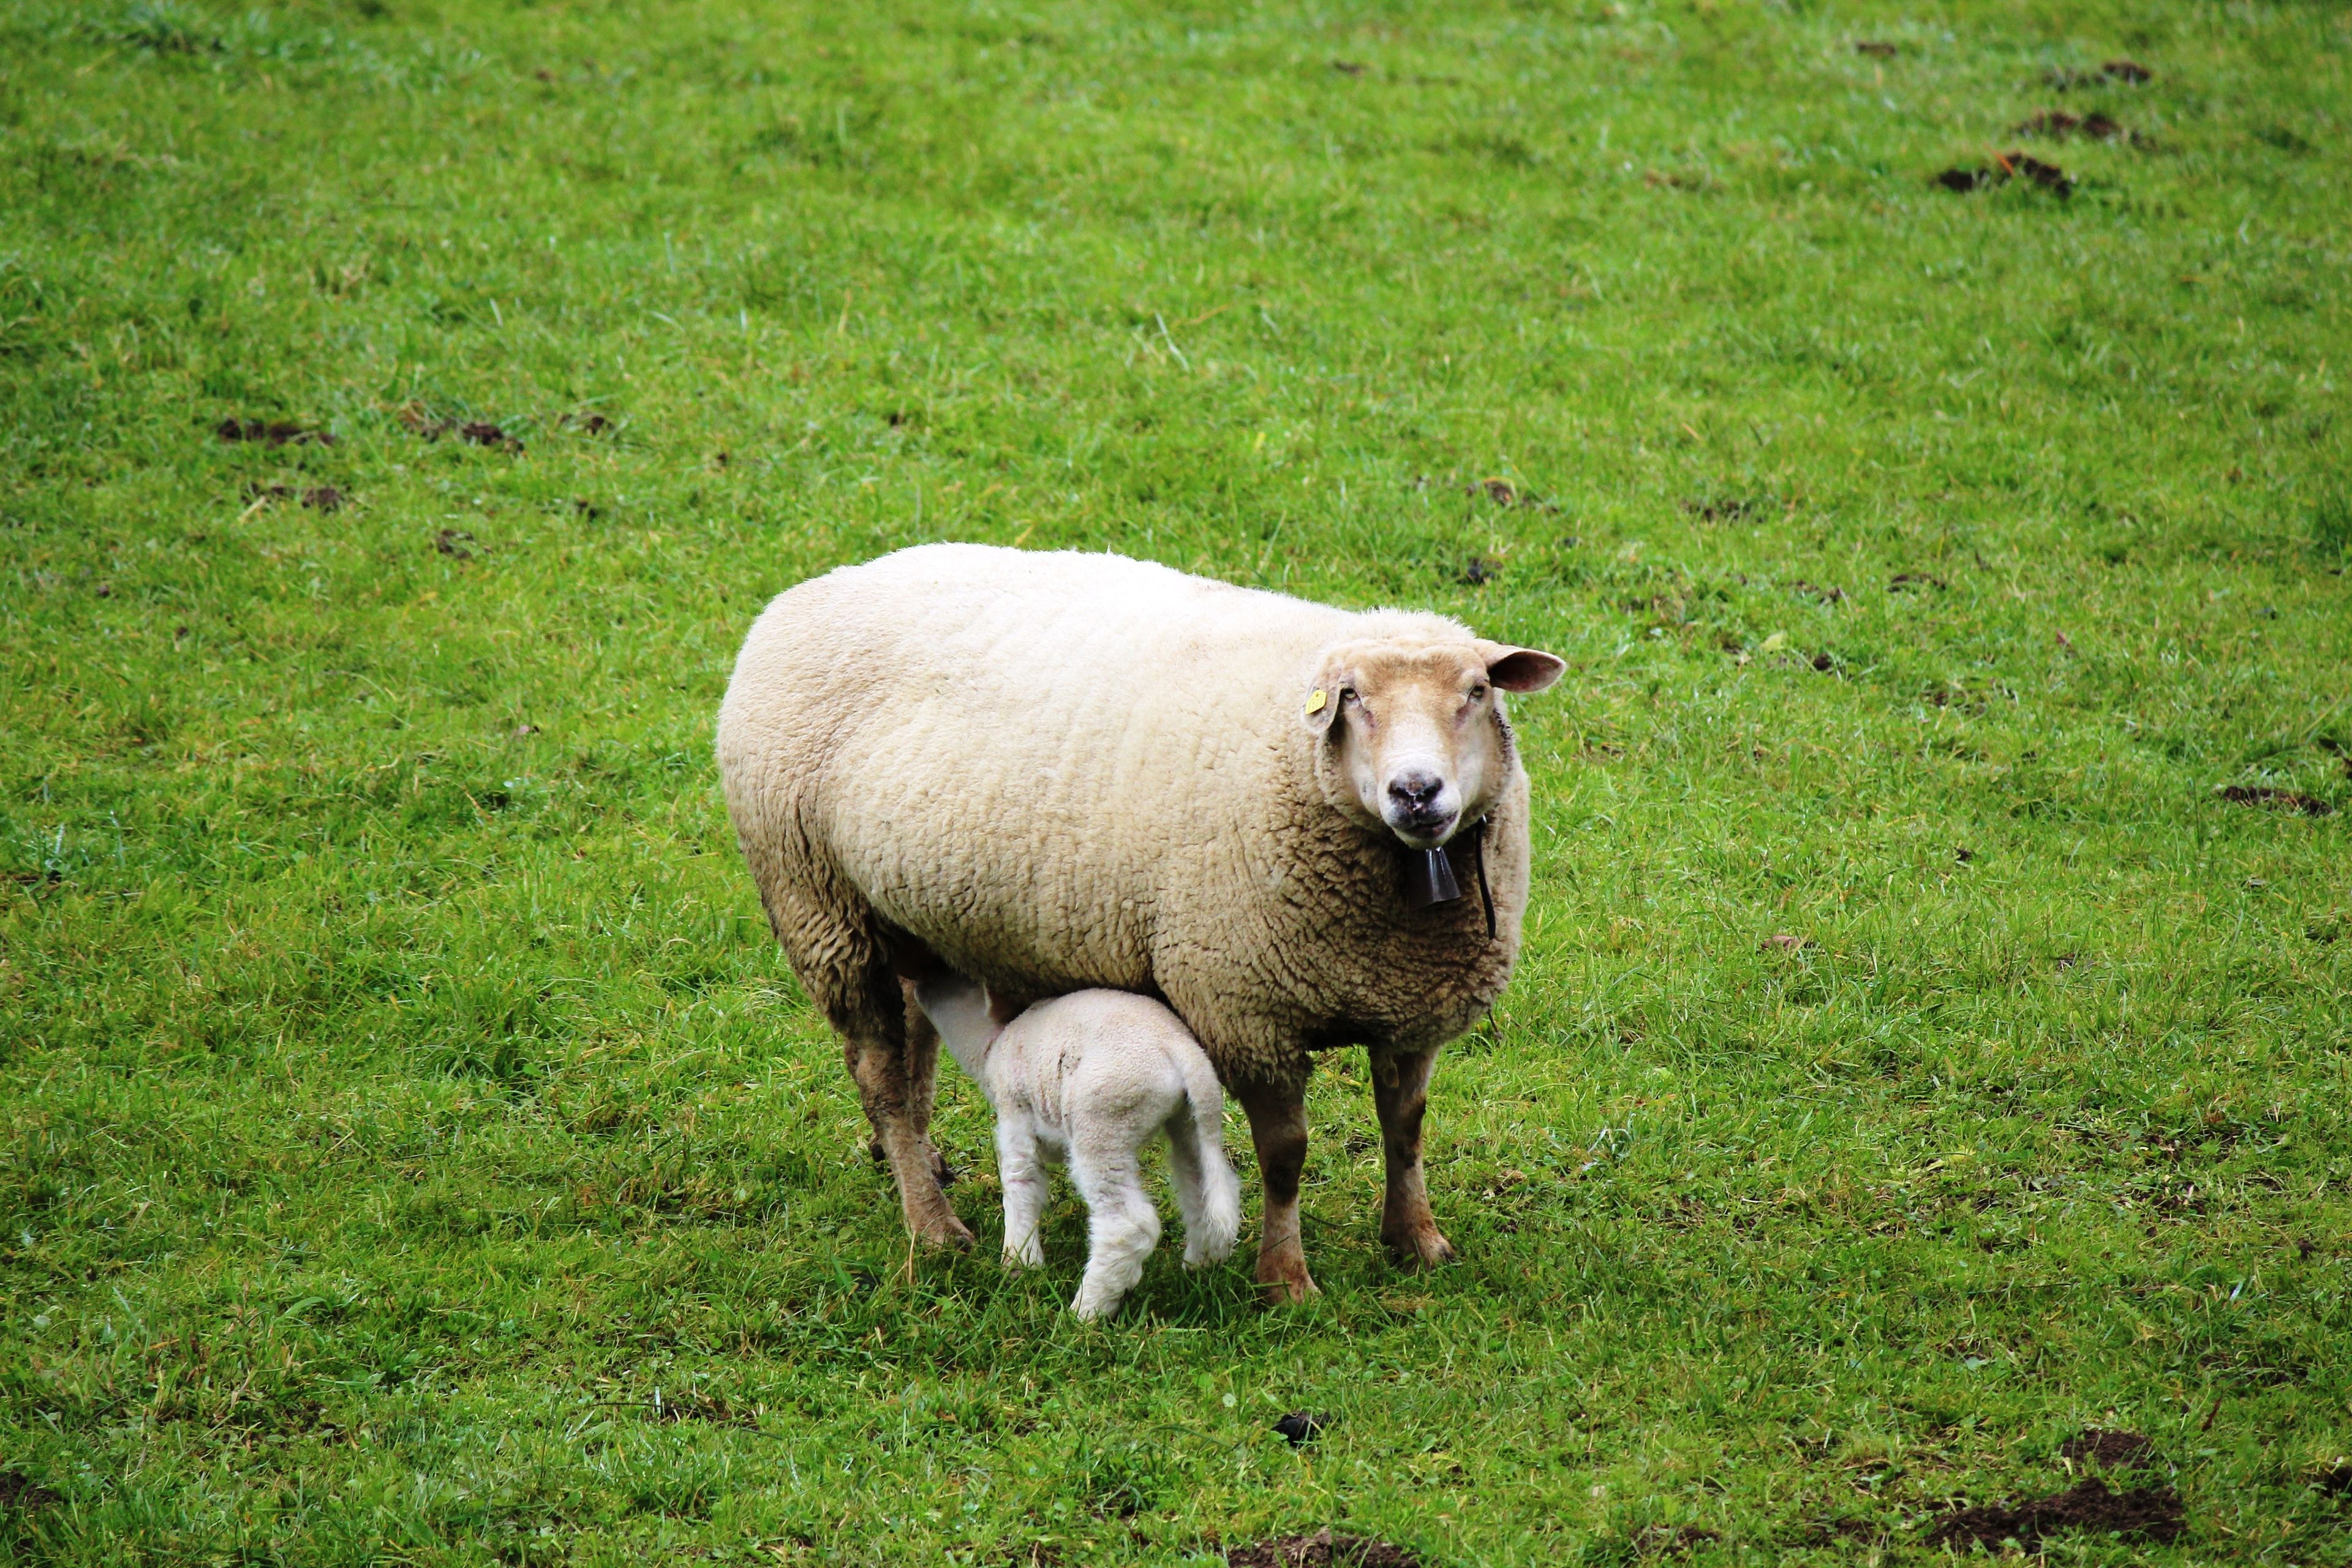 A lamb stays close to its mother.